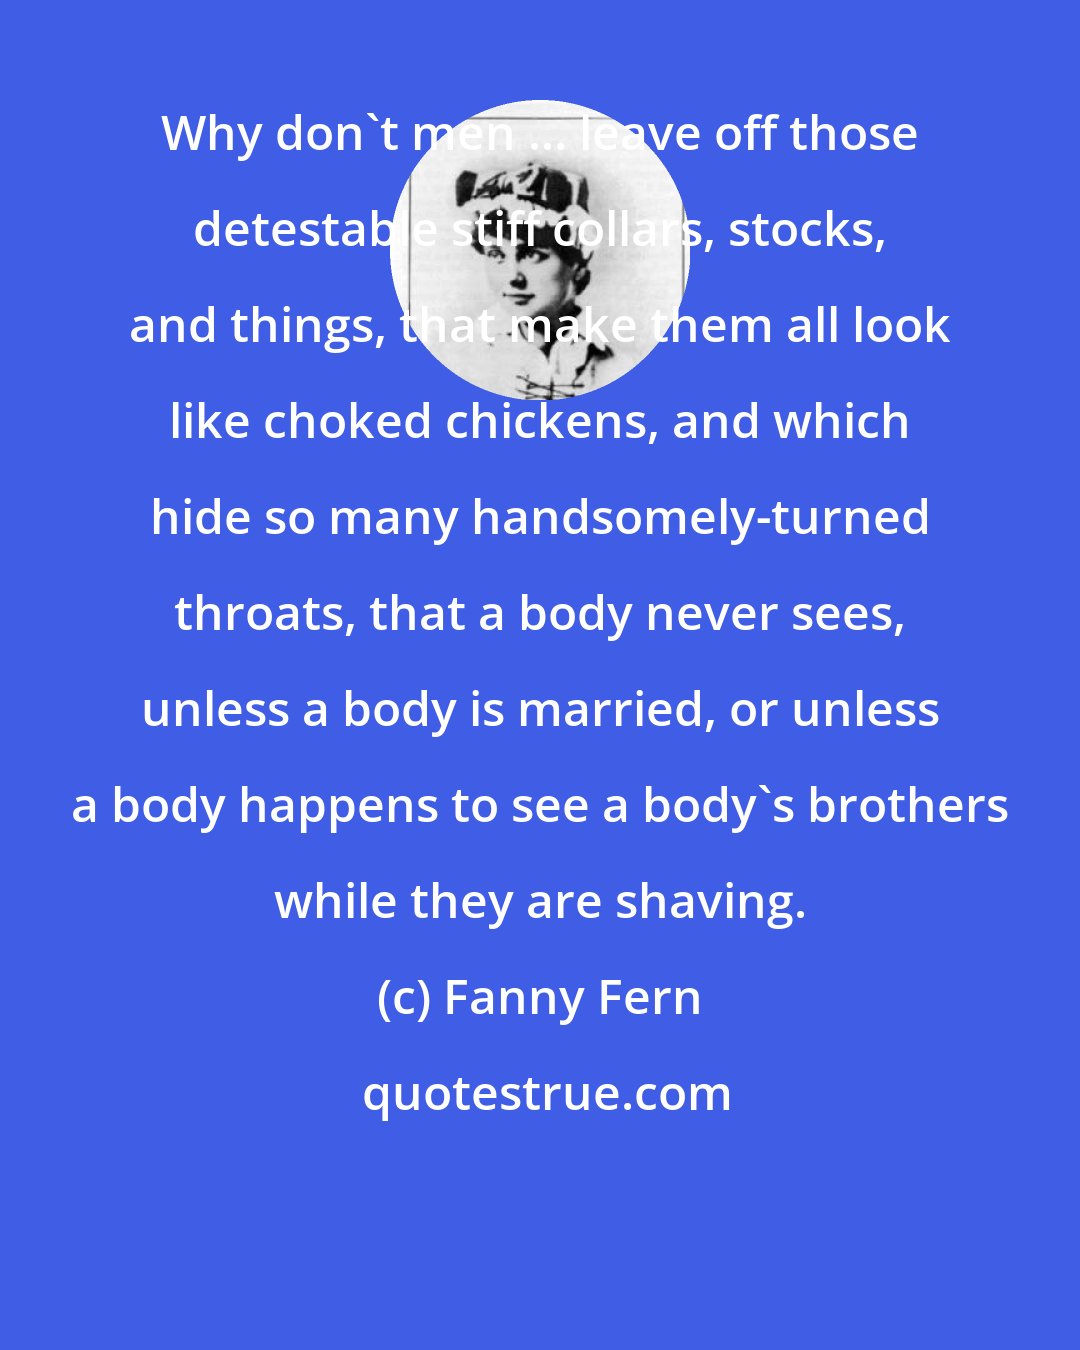 Fanny Fern: Why don't men ... leave off those detestable stiff collars, stocks, and things, that make them all look like choked chickens, and which hide so many handsomely-turned throats, that a body never sees, unless a body is married, or unless a body happens to see a body's brothers while they are shaving.